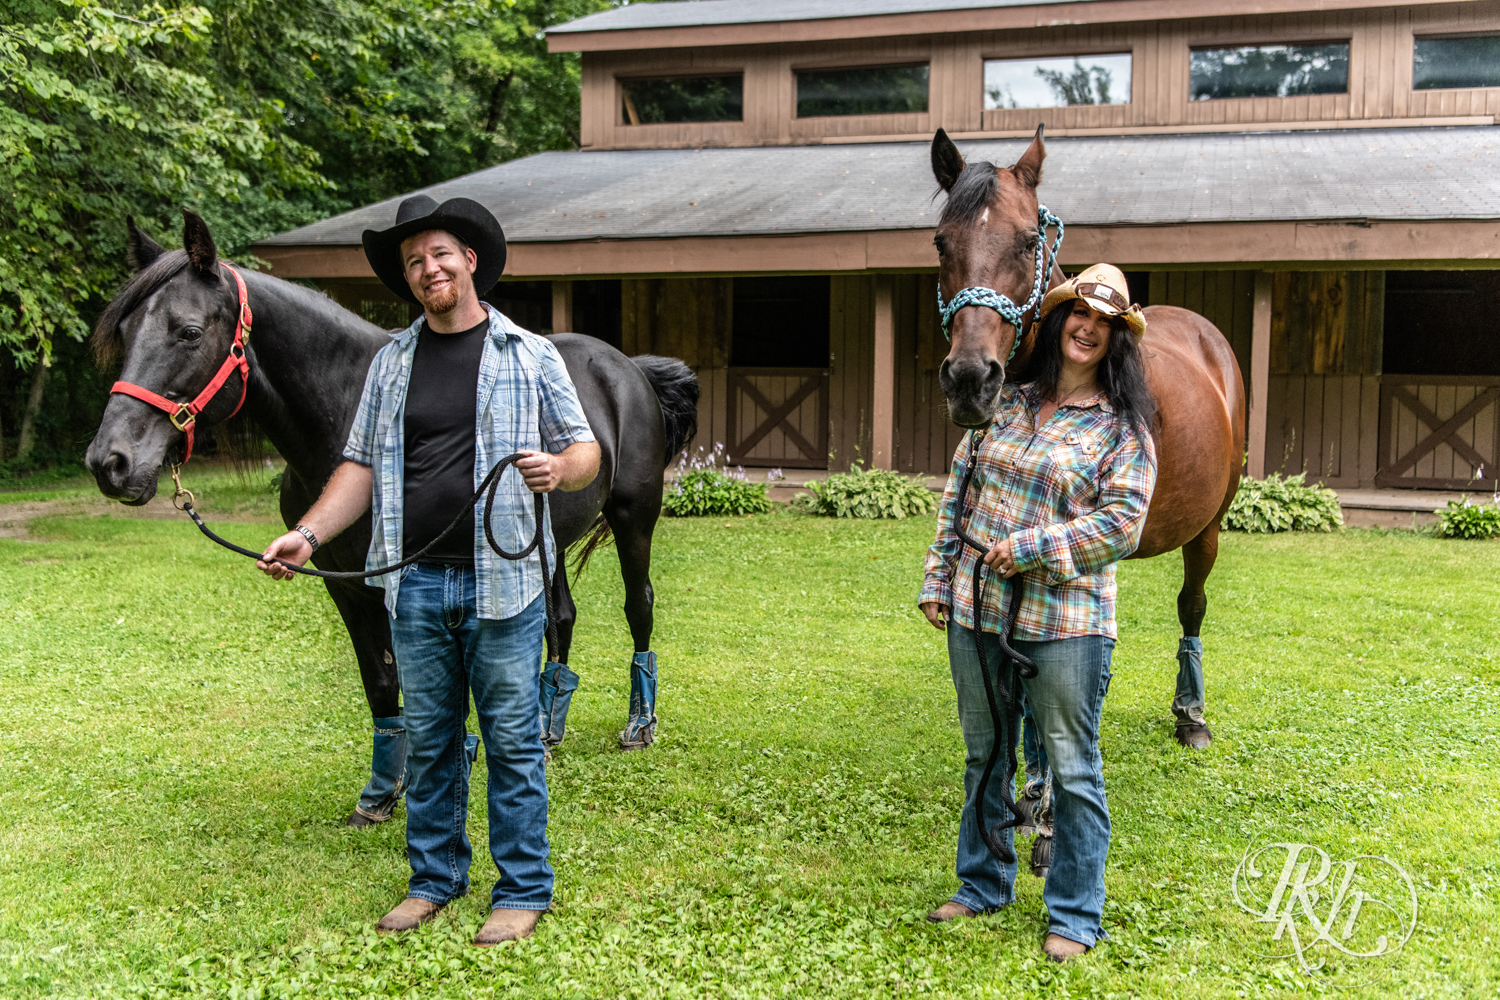 Lebanese woman and man in cowboy hats smile at their horse farm in Chisago City, Minnesota.